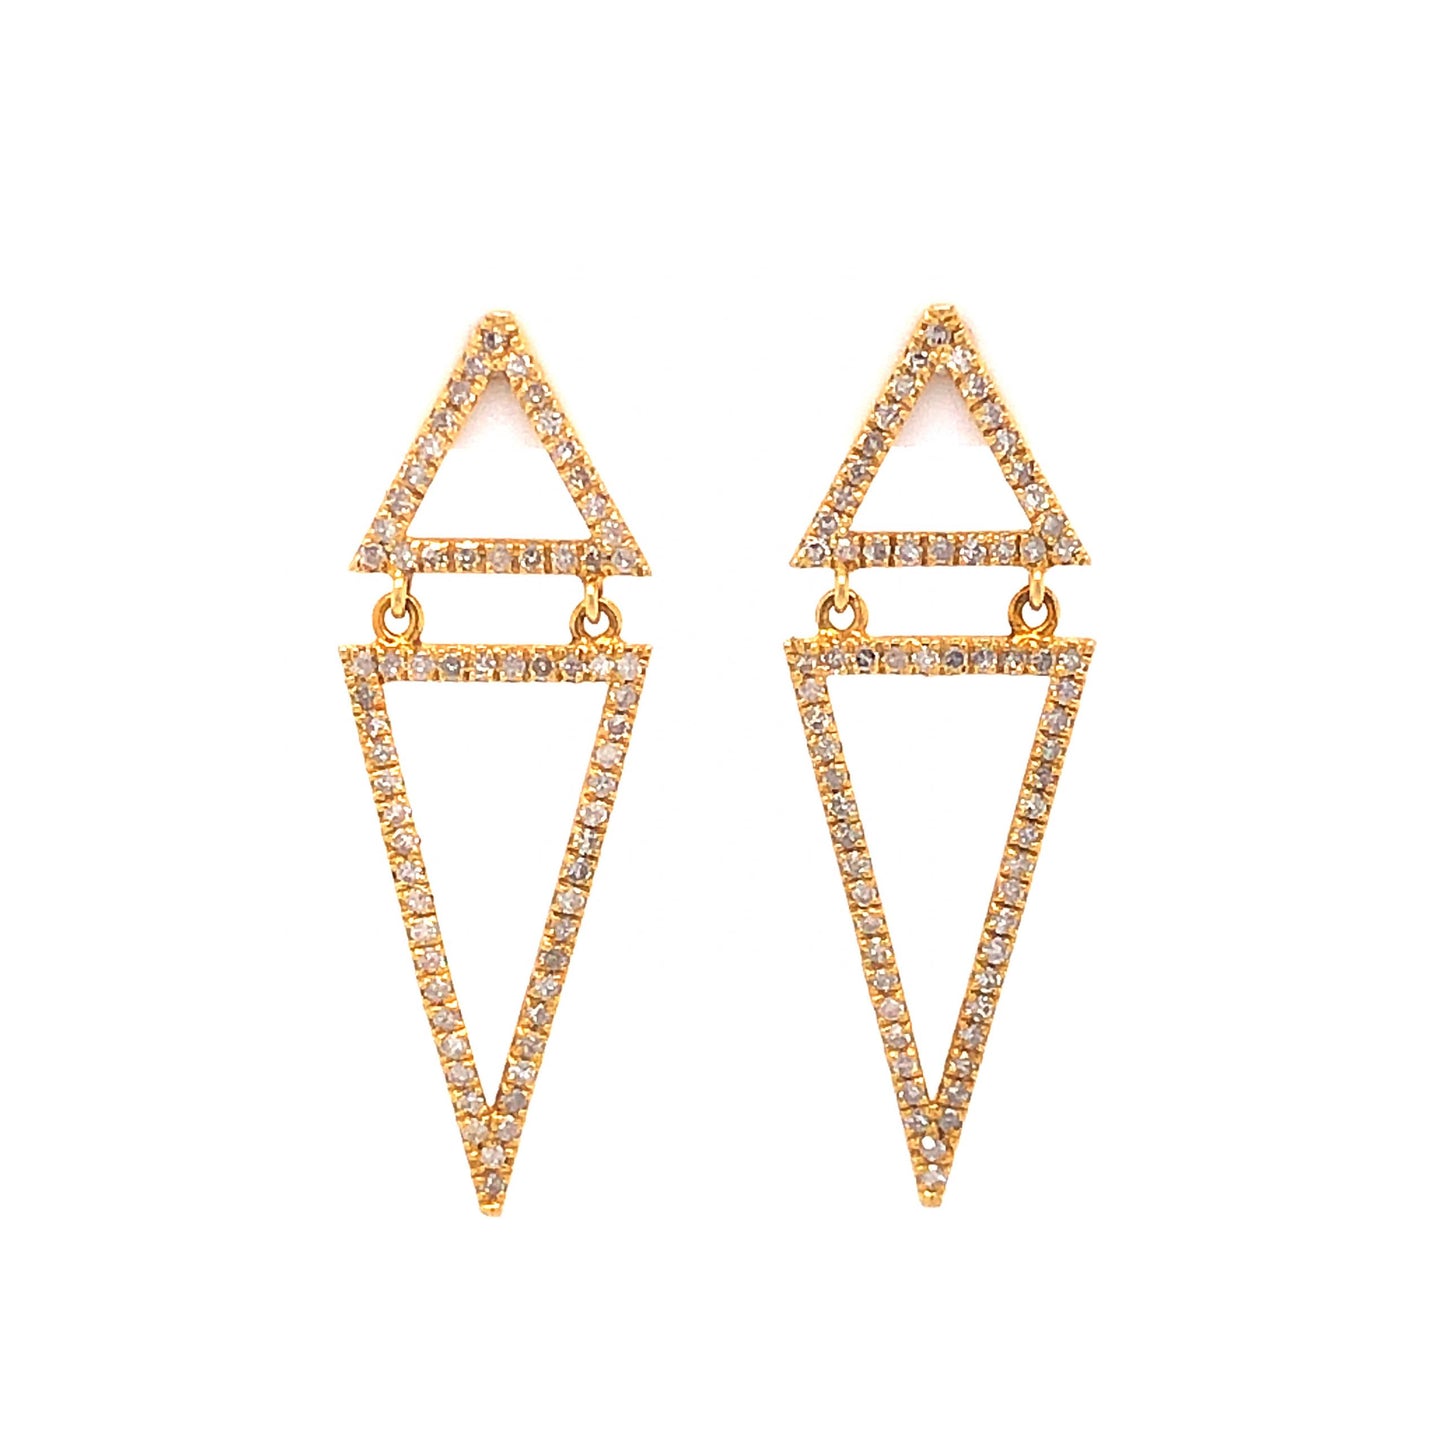 Stacked Triangle Pave Diamond Earrings in 18k Yellow Gold